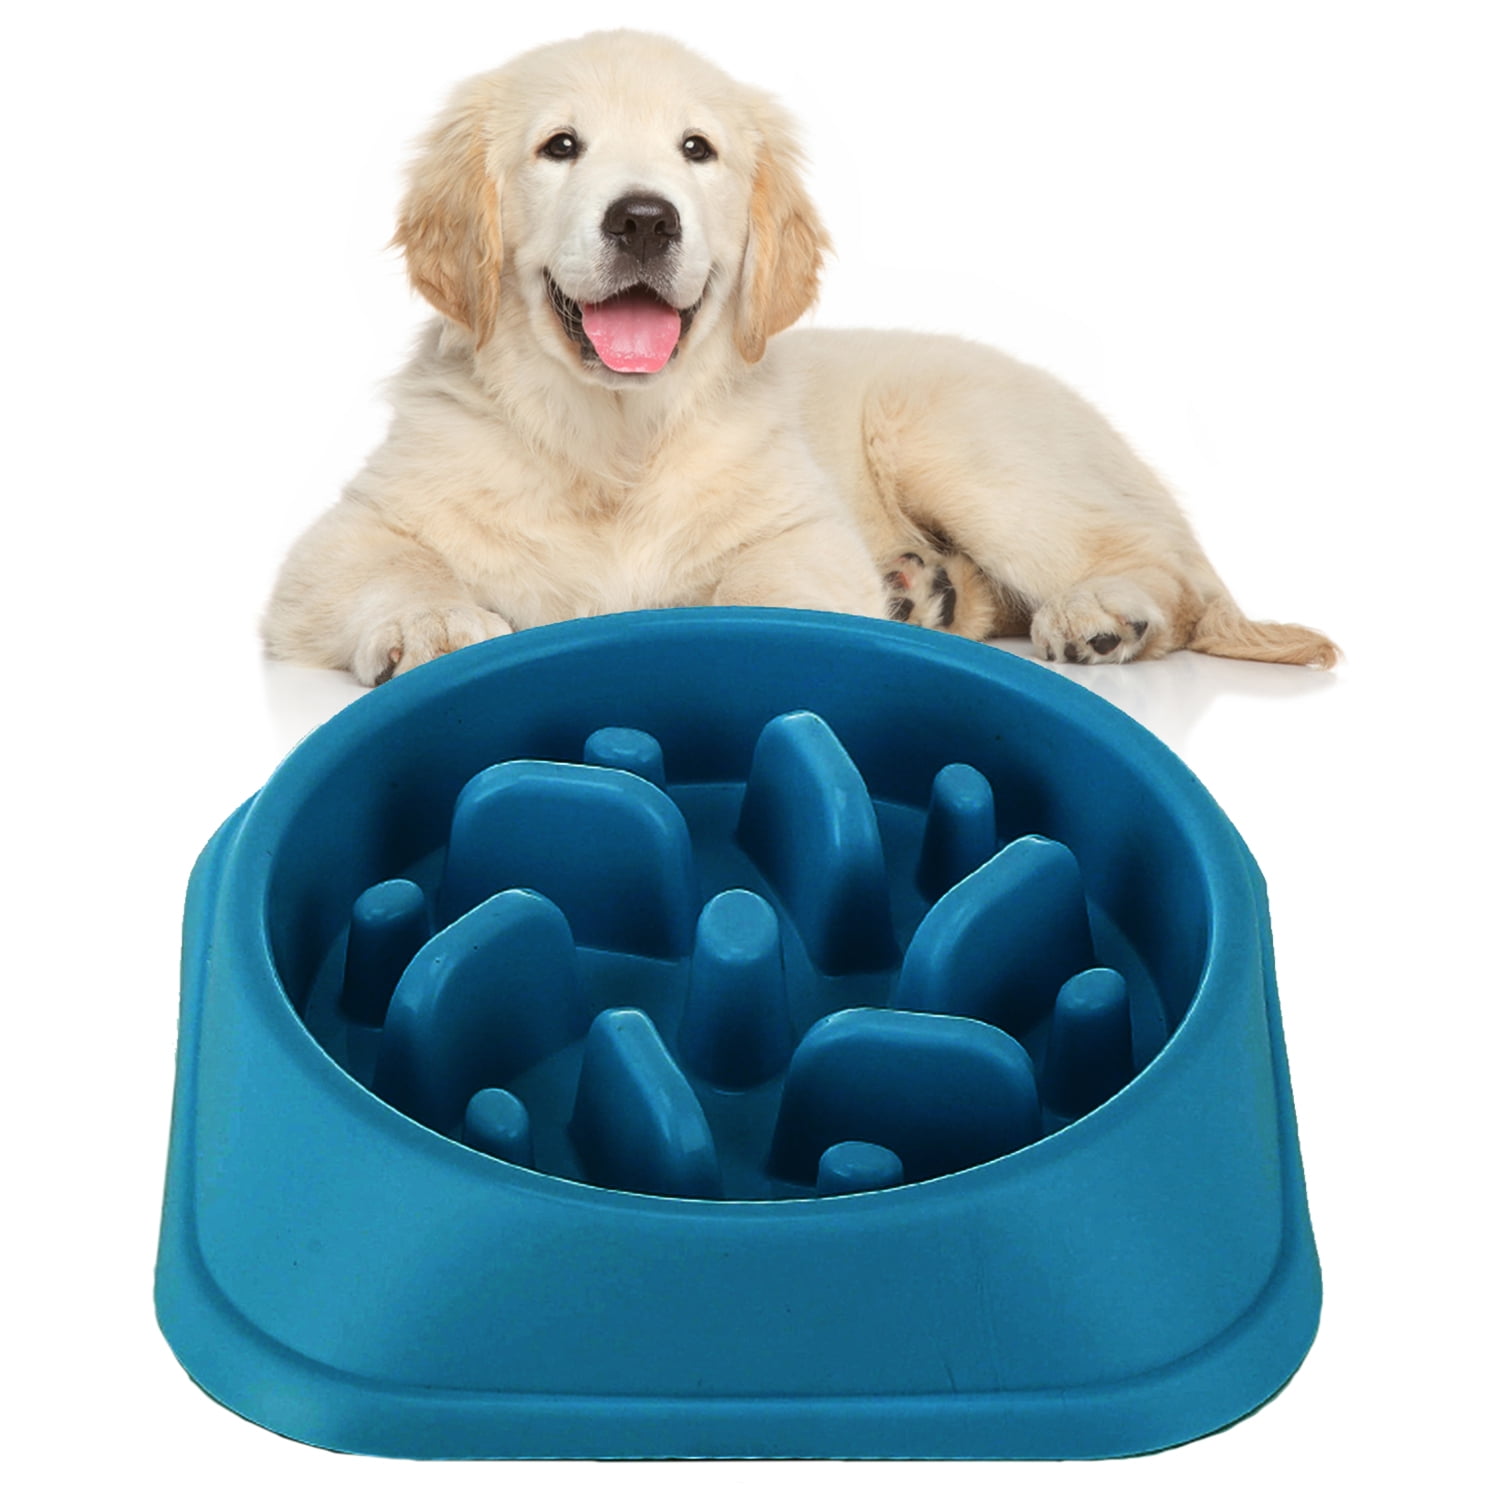  PETBABA Dog Bowl Slow Feeder, Interactive Puzzle Fun Silicone  Nonskid Feed Dish, Against Bloat in Eating Food, Keep Your Cat Pet Healthy  - S in Blue : Pet Supplies